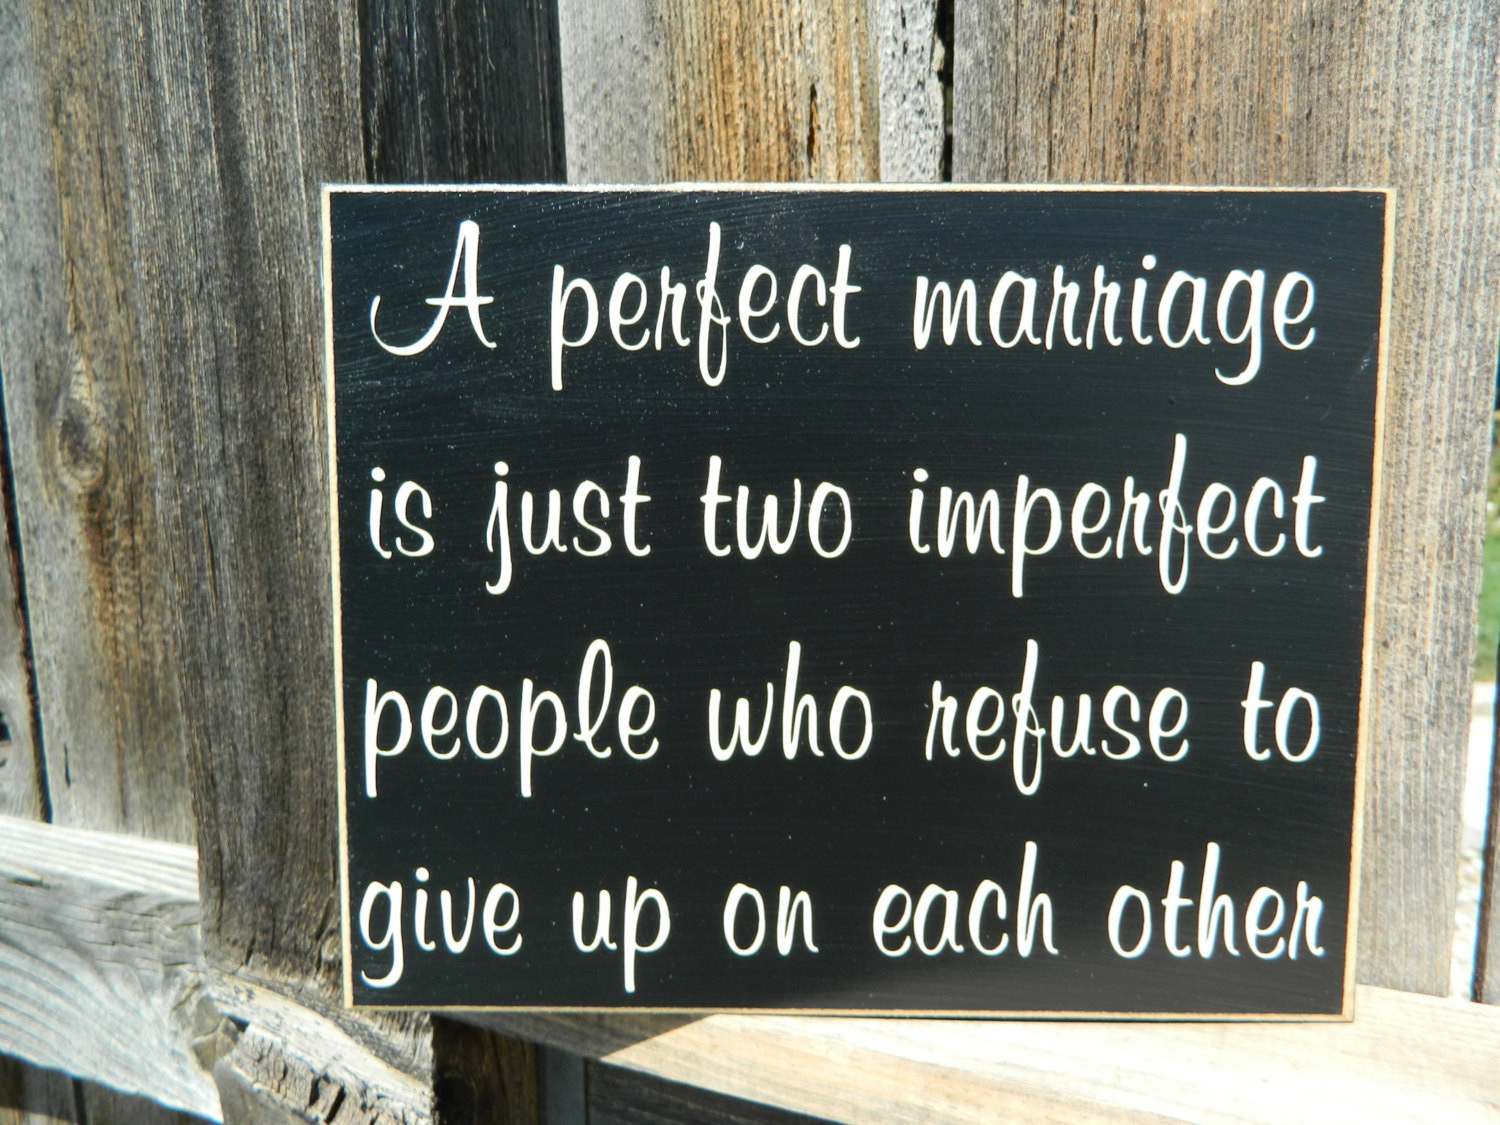 Spiritual Marriage Quotes
 Inspirational QuoteA perfect marriage wood sign